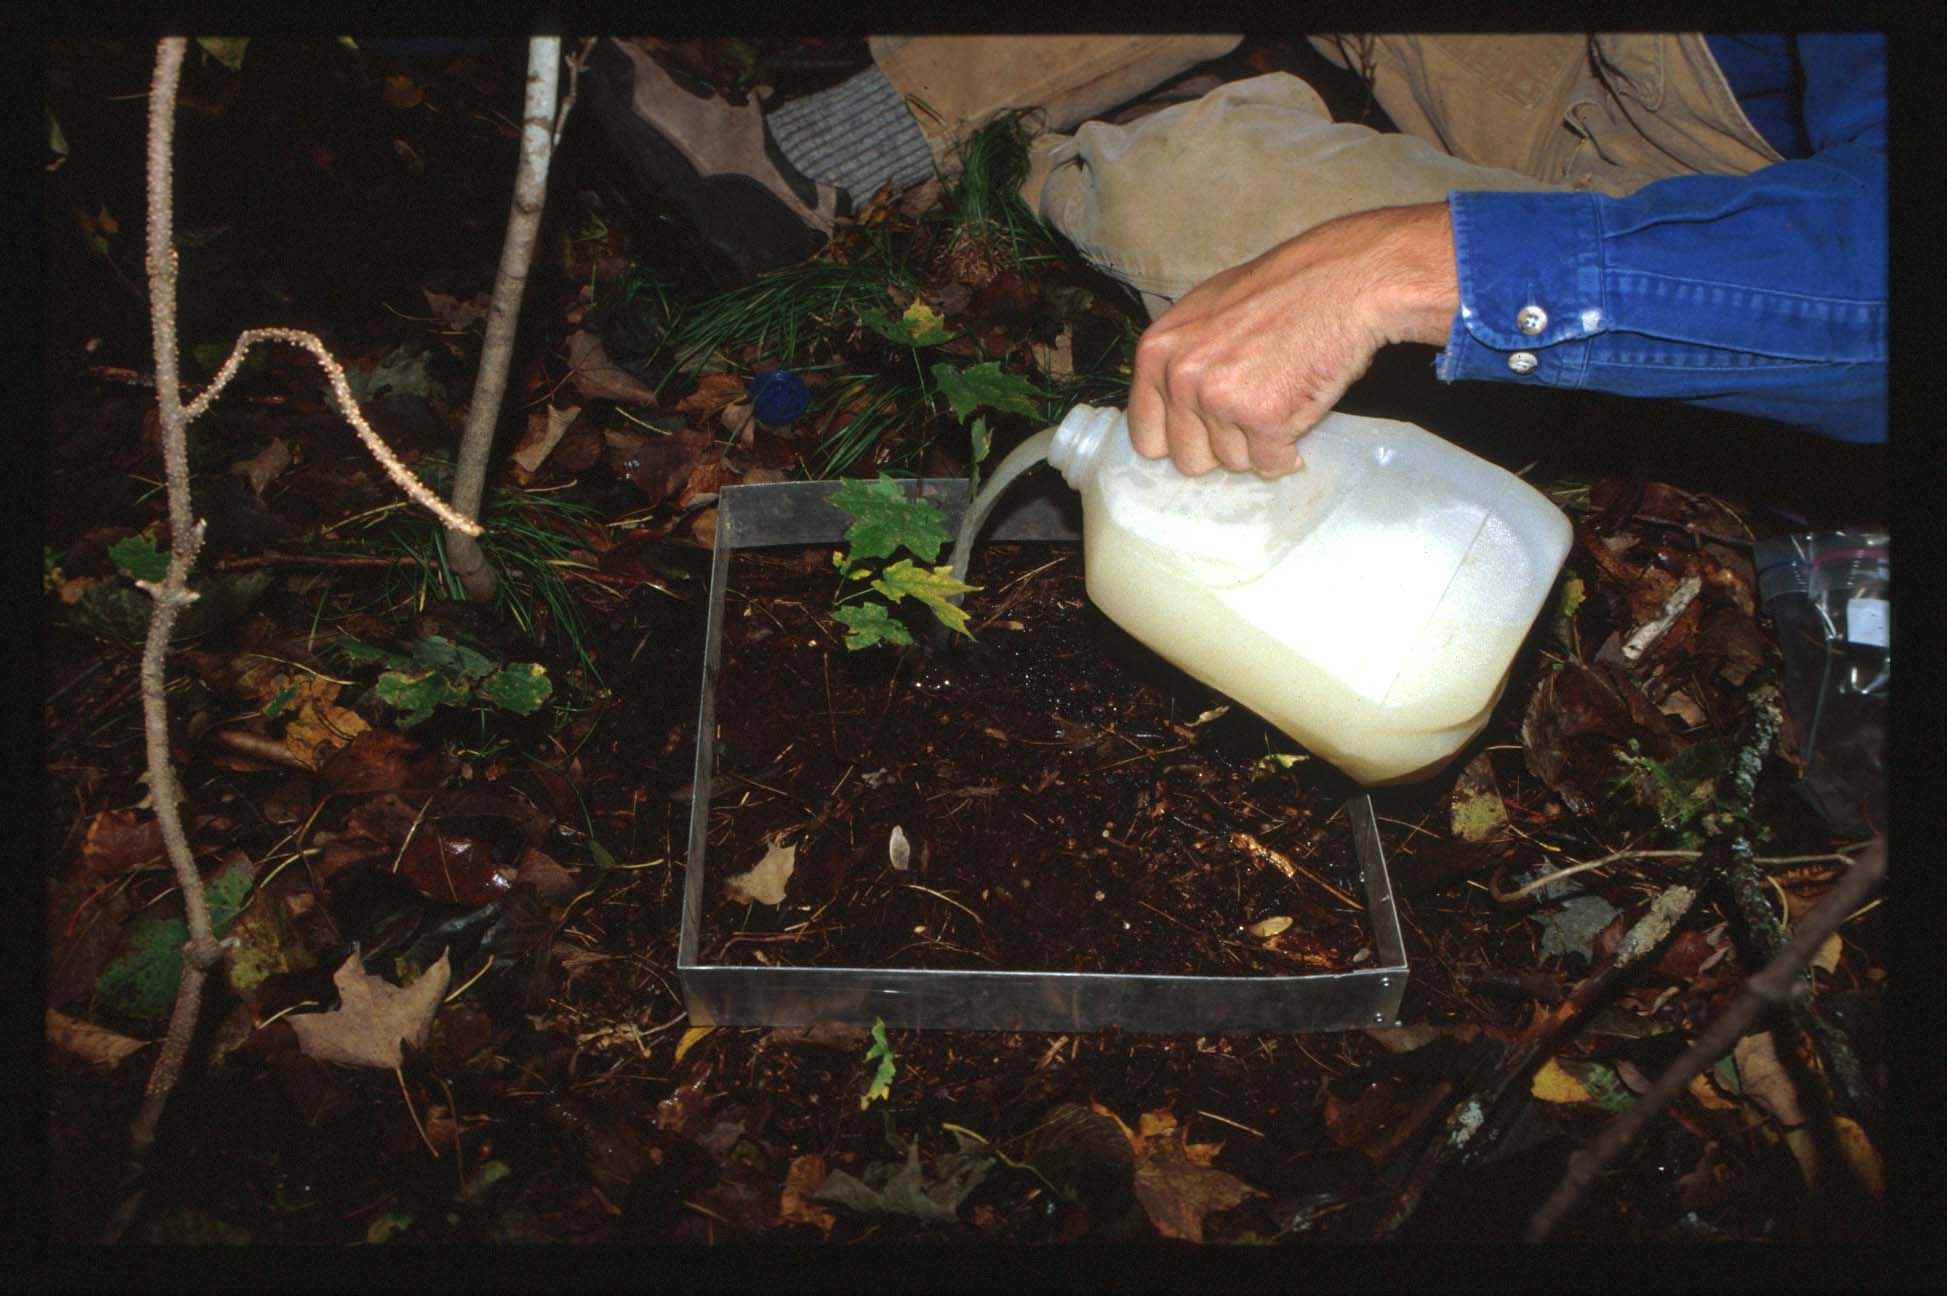 Person's hand pouring white liquid from jug into 1 foot metal frame on woodland soil